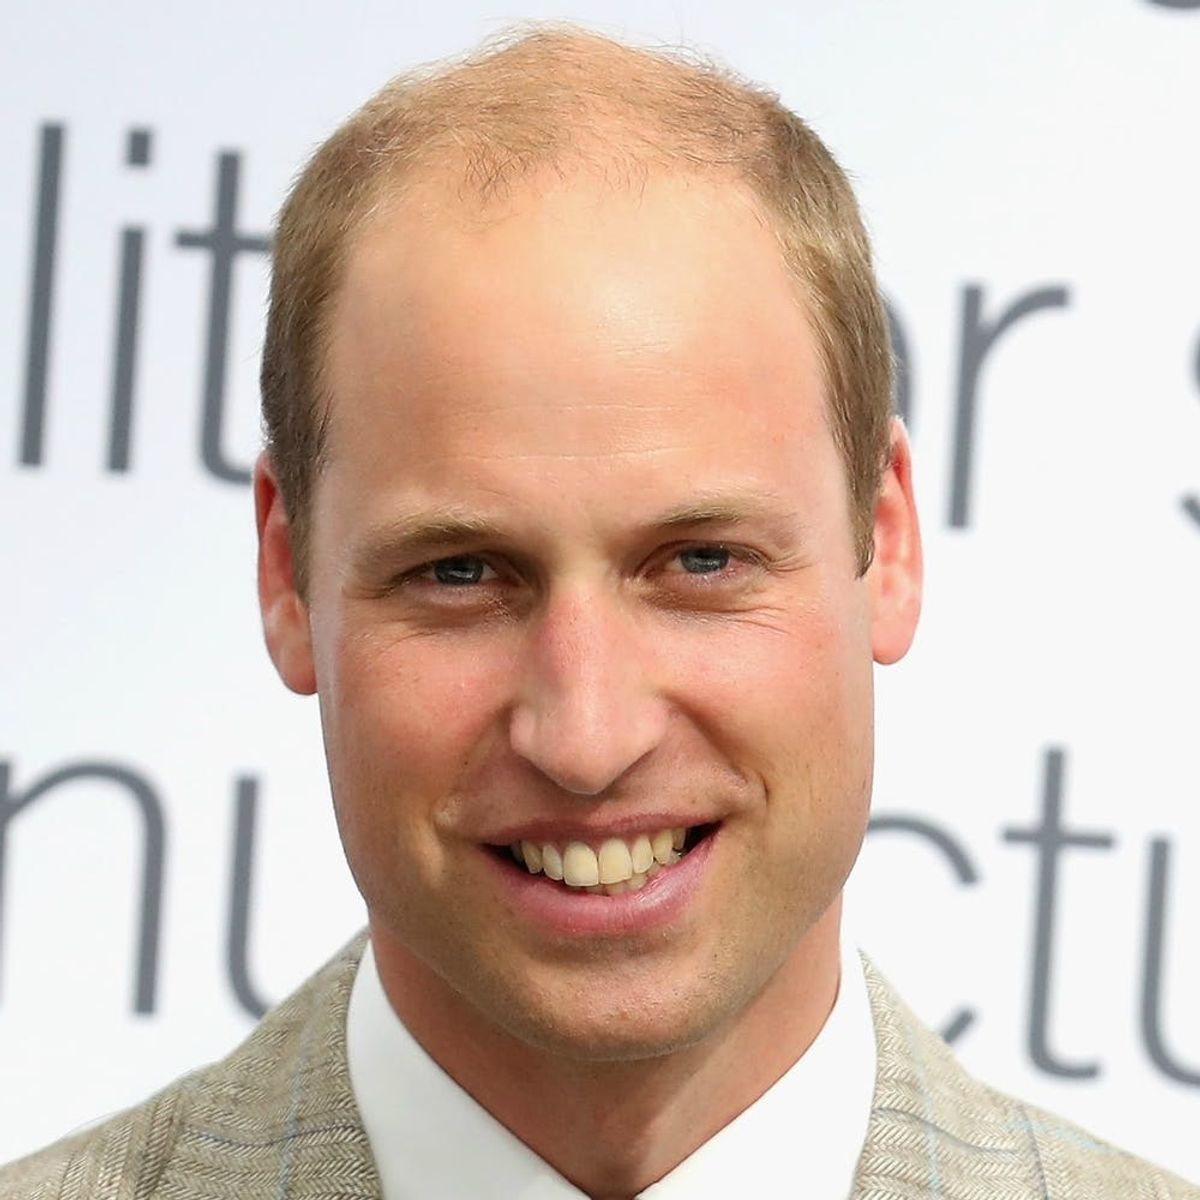 Read the Touching Advice That Prince William Gave a Young Boy Who Lost His Mom